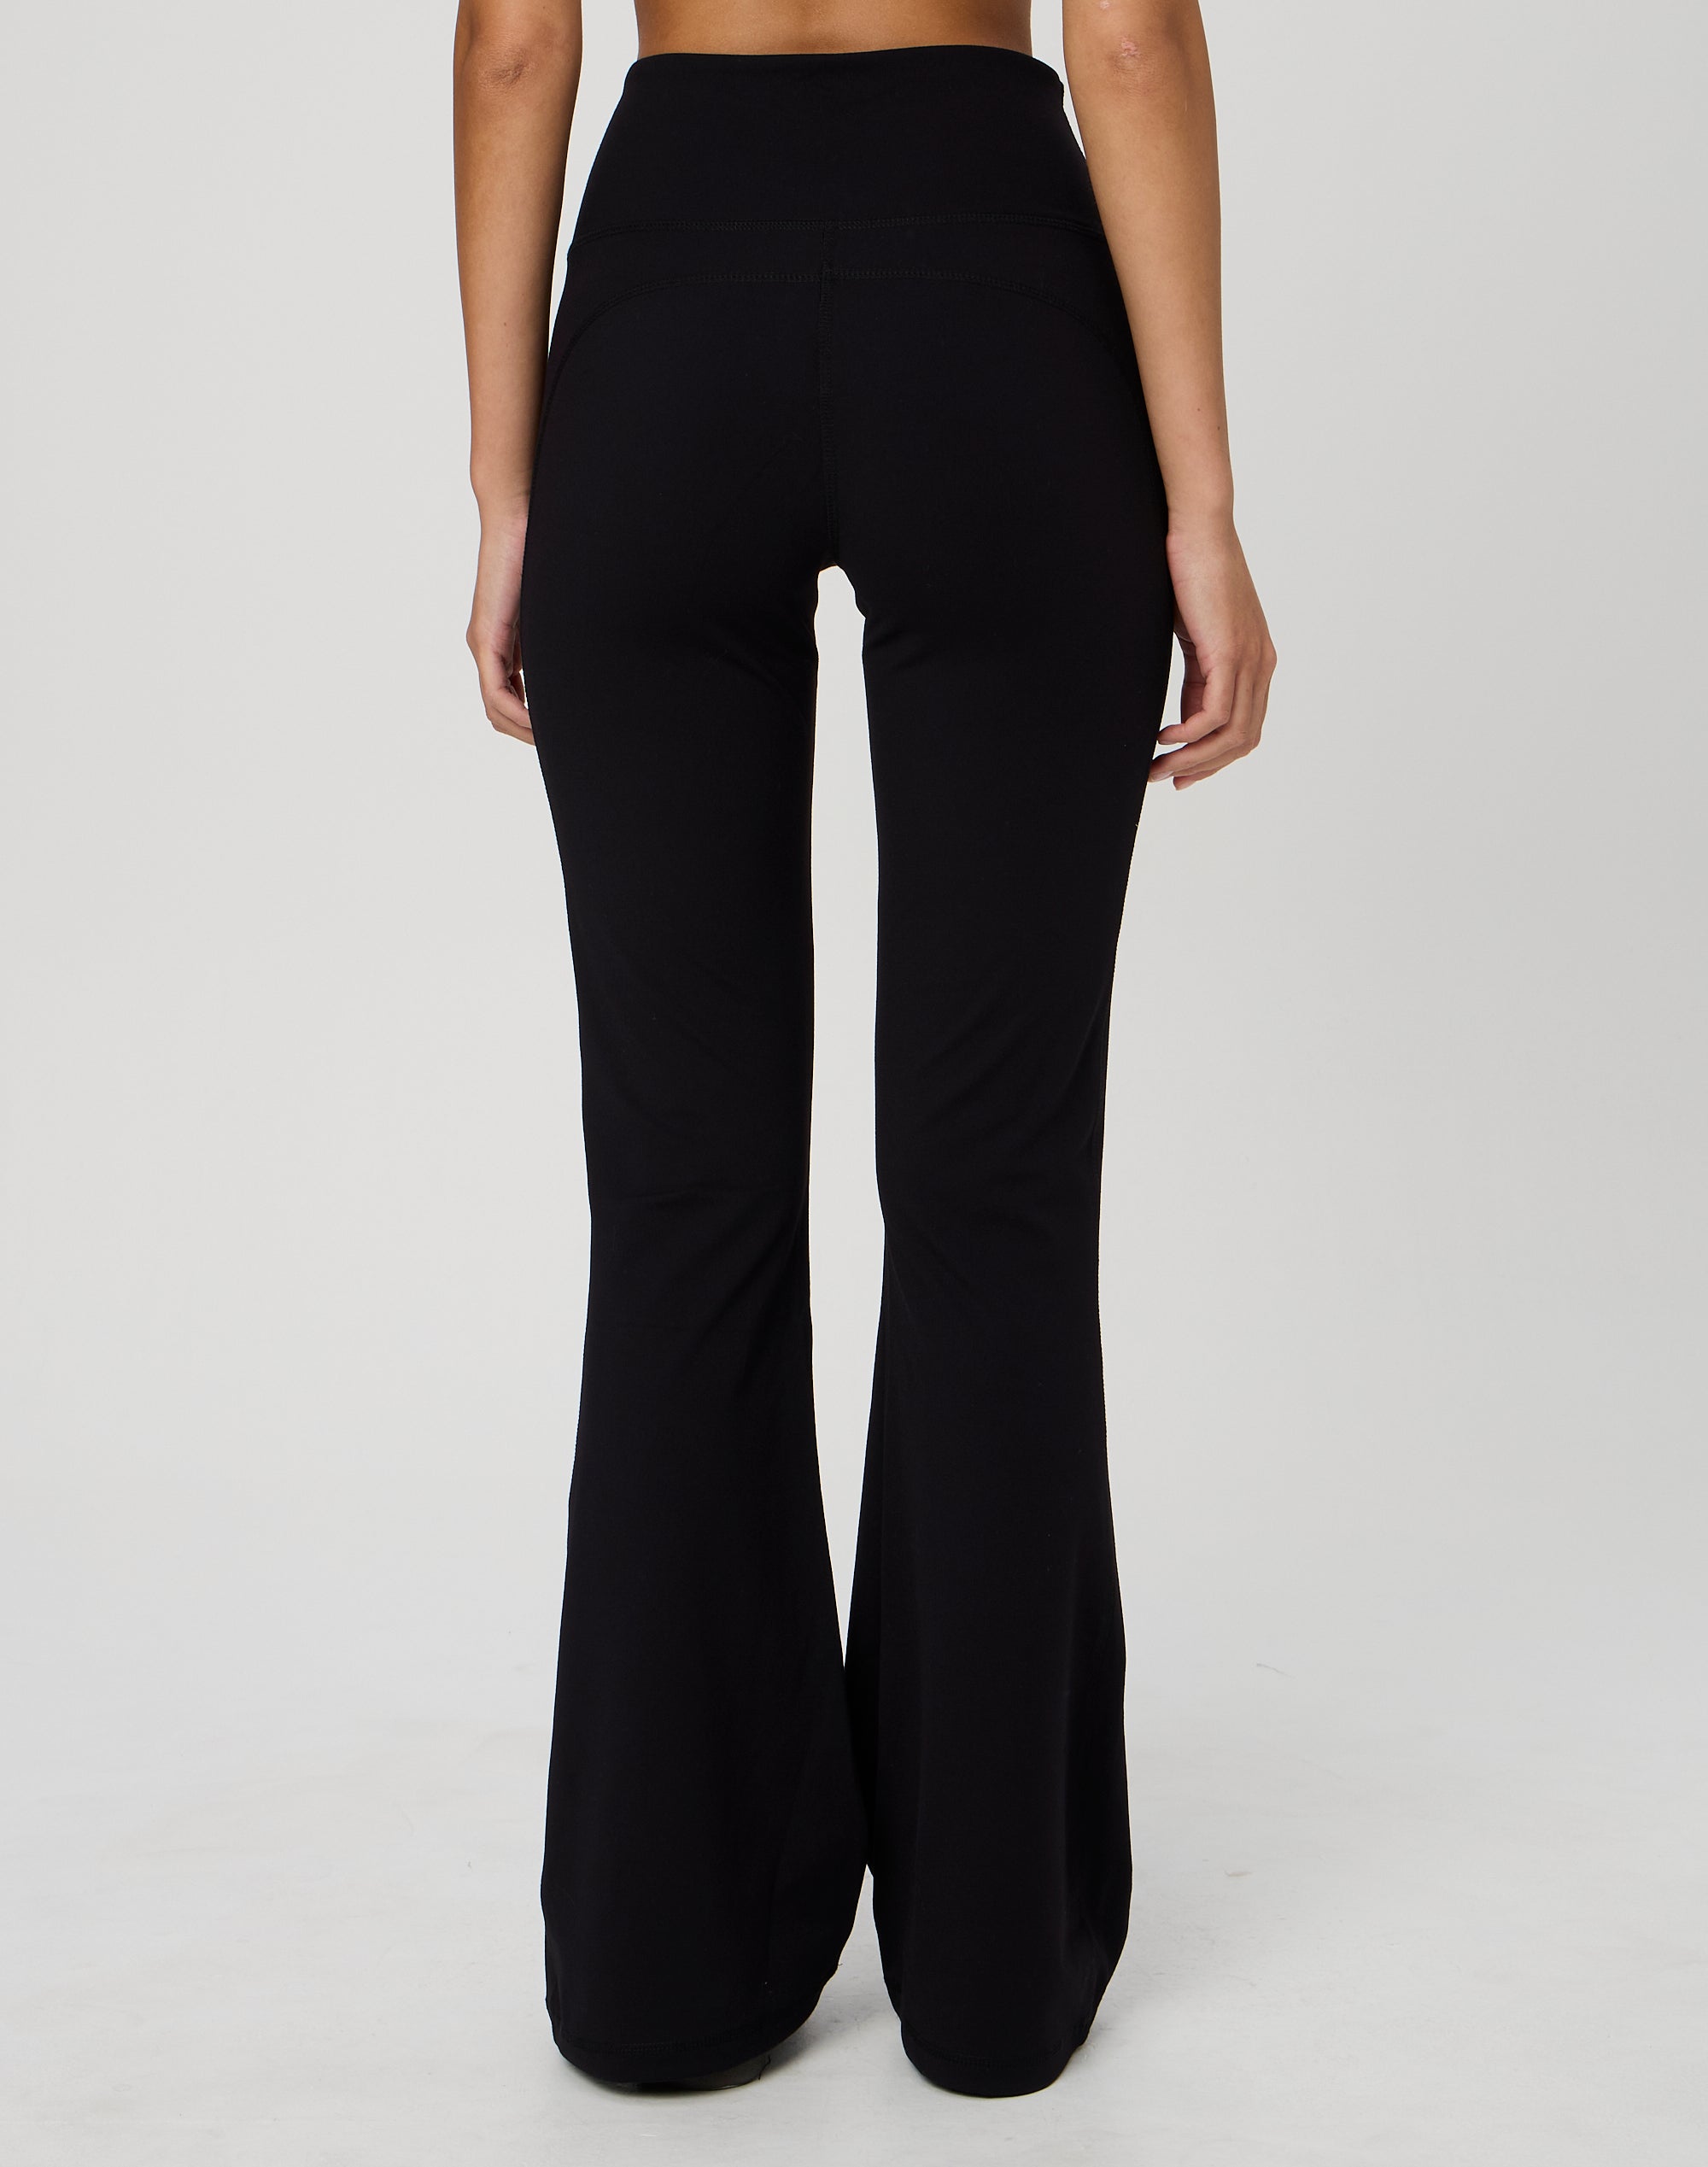 https://www.glassons.com/content/products/co-simone-butter-soft-flare-black-back-pw119603but.jpg